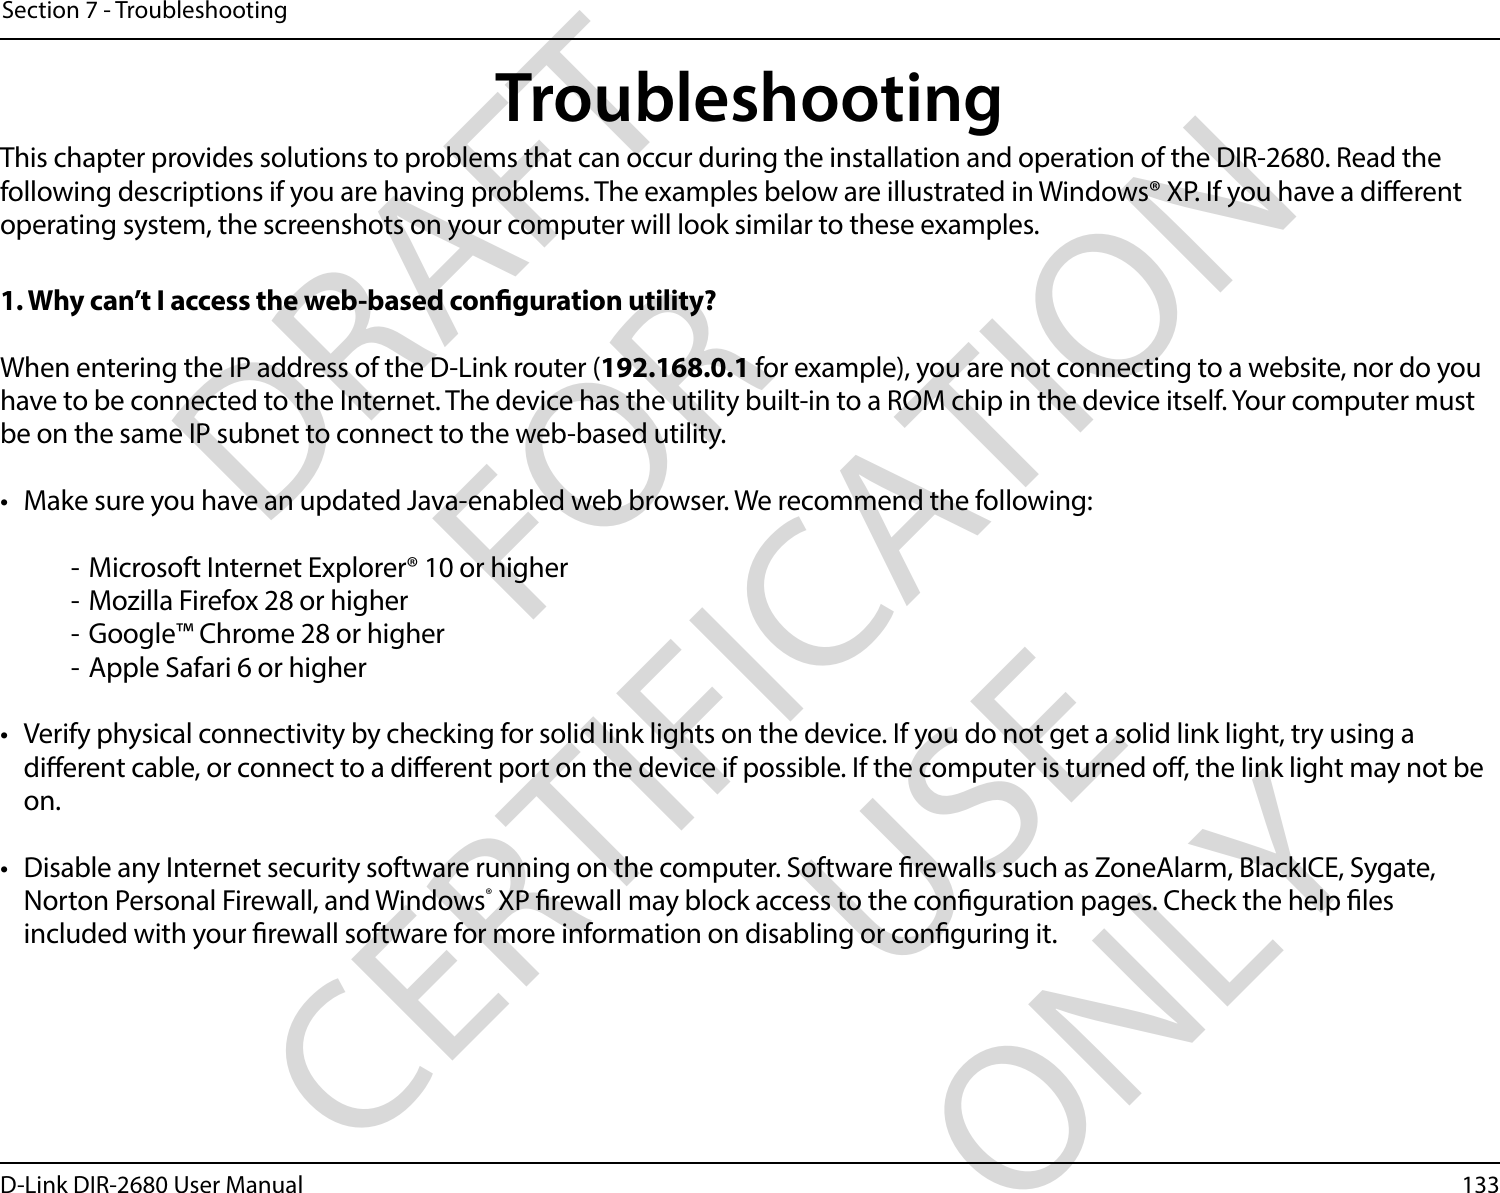 133D-Link DIR-2680 User ManualSection 7 - TroubleshootingTroubleshootingThis chapter provides solutions to problems that can occur during the installation and operation of the DIR-2680. Read the following descriptions if you are having problems. The examples below are illustrated in Windows® XP. If you have a dierent operating system, the screenshots on your computer will look similar to these examples.1. Why can’t I access the web-based conguration utility?When entering the IP address of the D-Link router (192.168.0.1 for example), you are not connecting to a website, nor do you have to be connected to the Internet. The device has the utility built-in to a ROM chip in the device itself. Your computer must be on the same IP subnet to connect to the web-based utility. •  Make sure you have an updated Java-enabled web browser. We recommend the following:  - Microsoft Internet Explorer® 10 or higher- Mozilla Firefox 28 or higher- Google™ Chrome 28 or higher- Apple Safari 6 or higher•  Verify physical connectivity by checking for solid link lights on the device. If you do not get a solid link light, try using a dierent cable, or connect to a dierent port on the device if possible. If the computer is turned o, the link light may not be on.•  Disable any Internet security software running on the computer. Software rewalls such as ZoneAlarm, BlackICE, Sygate, Norton Personal Firewall, and Windows® XP rewall may block access to the conguration pages. Check the help les included with your rewall software for more information on disabling or conguring it.DRAFT FOR CERTIFICATION USE ONLY